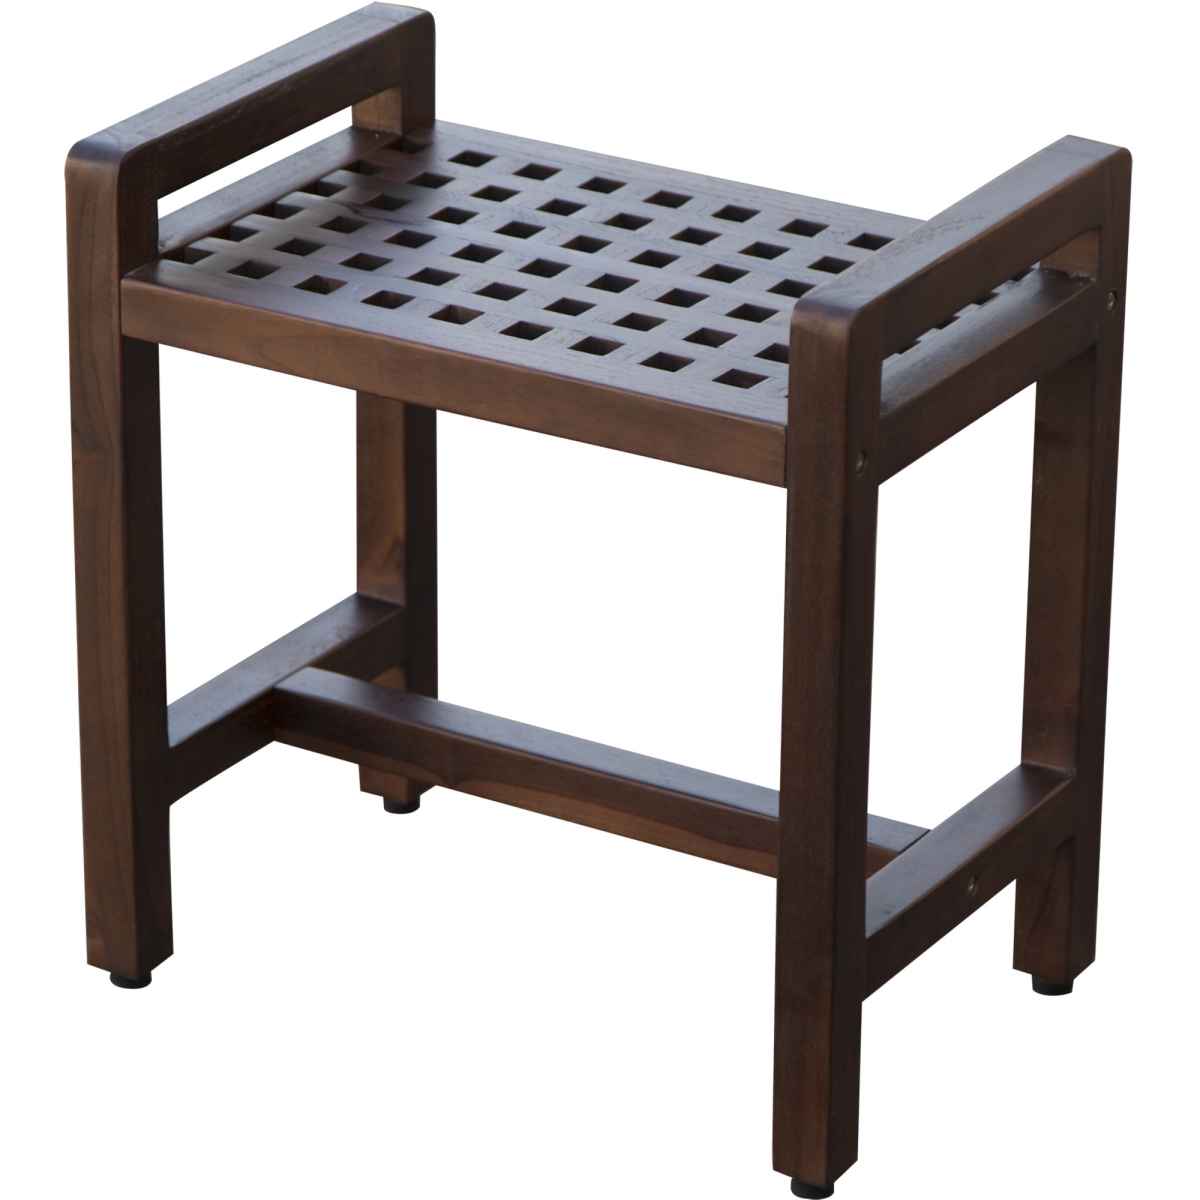 Picture of HomeRoots 376664 Rectangular Teak Lattice Pattern Shower or Outdoor Bench in Brown Finish